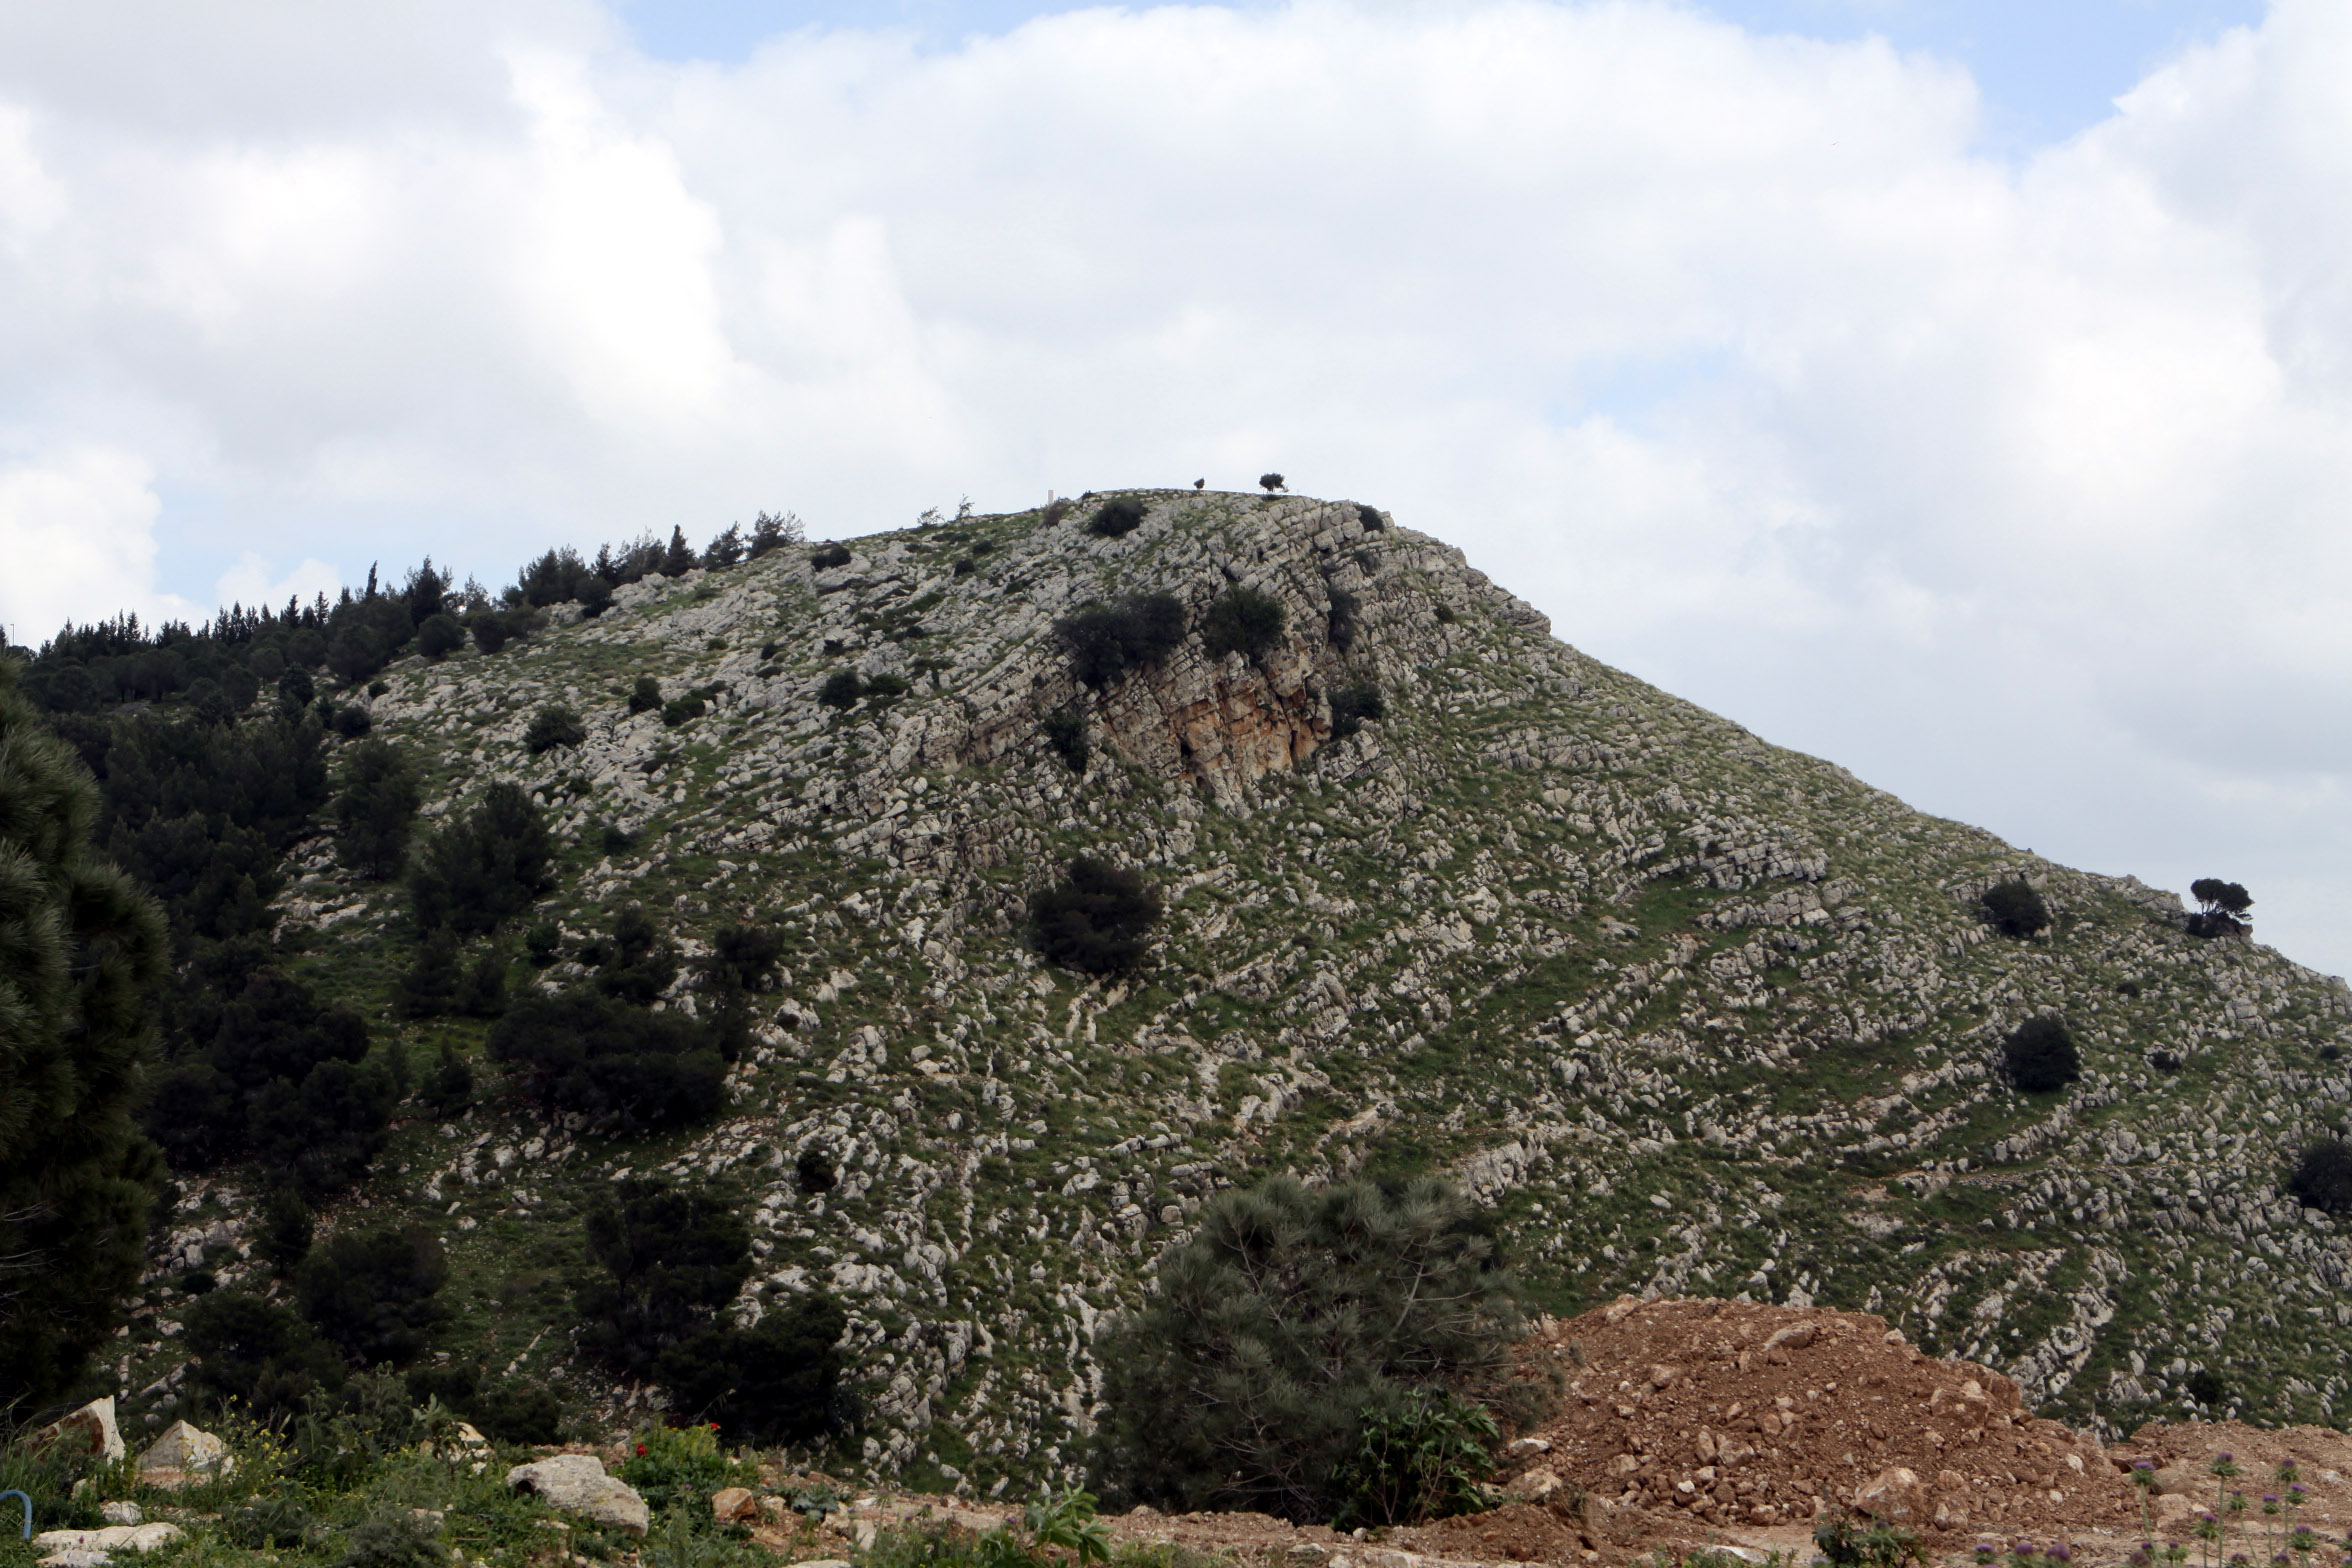 Mount of Precipice. According to the local tradition, this is the mount where ruffians tried to push Jesus over the cliff. It is not a right-angled cliff, but it is precipitous enough for anybody falling to suffer from a serious injury or death.